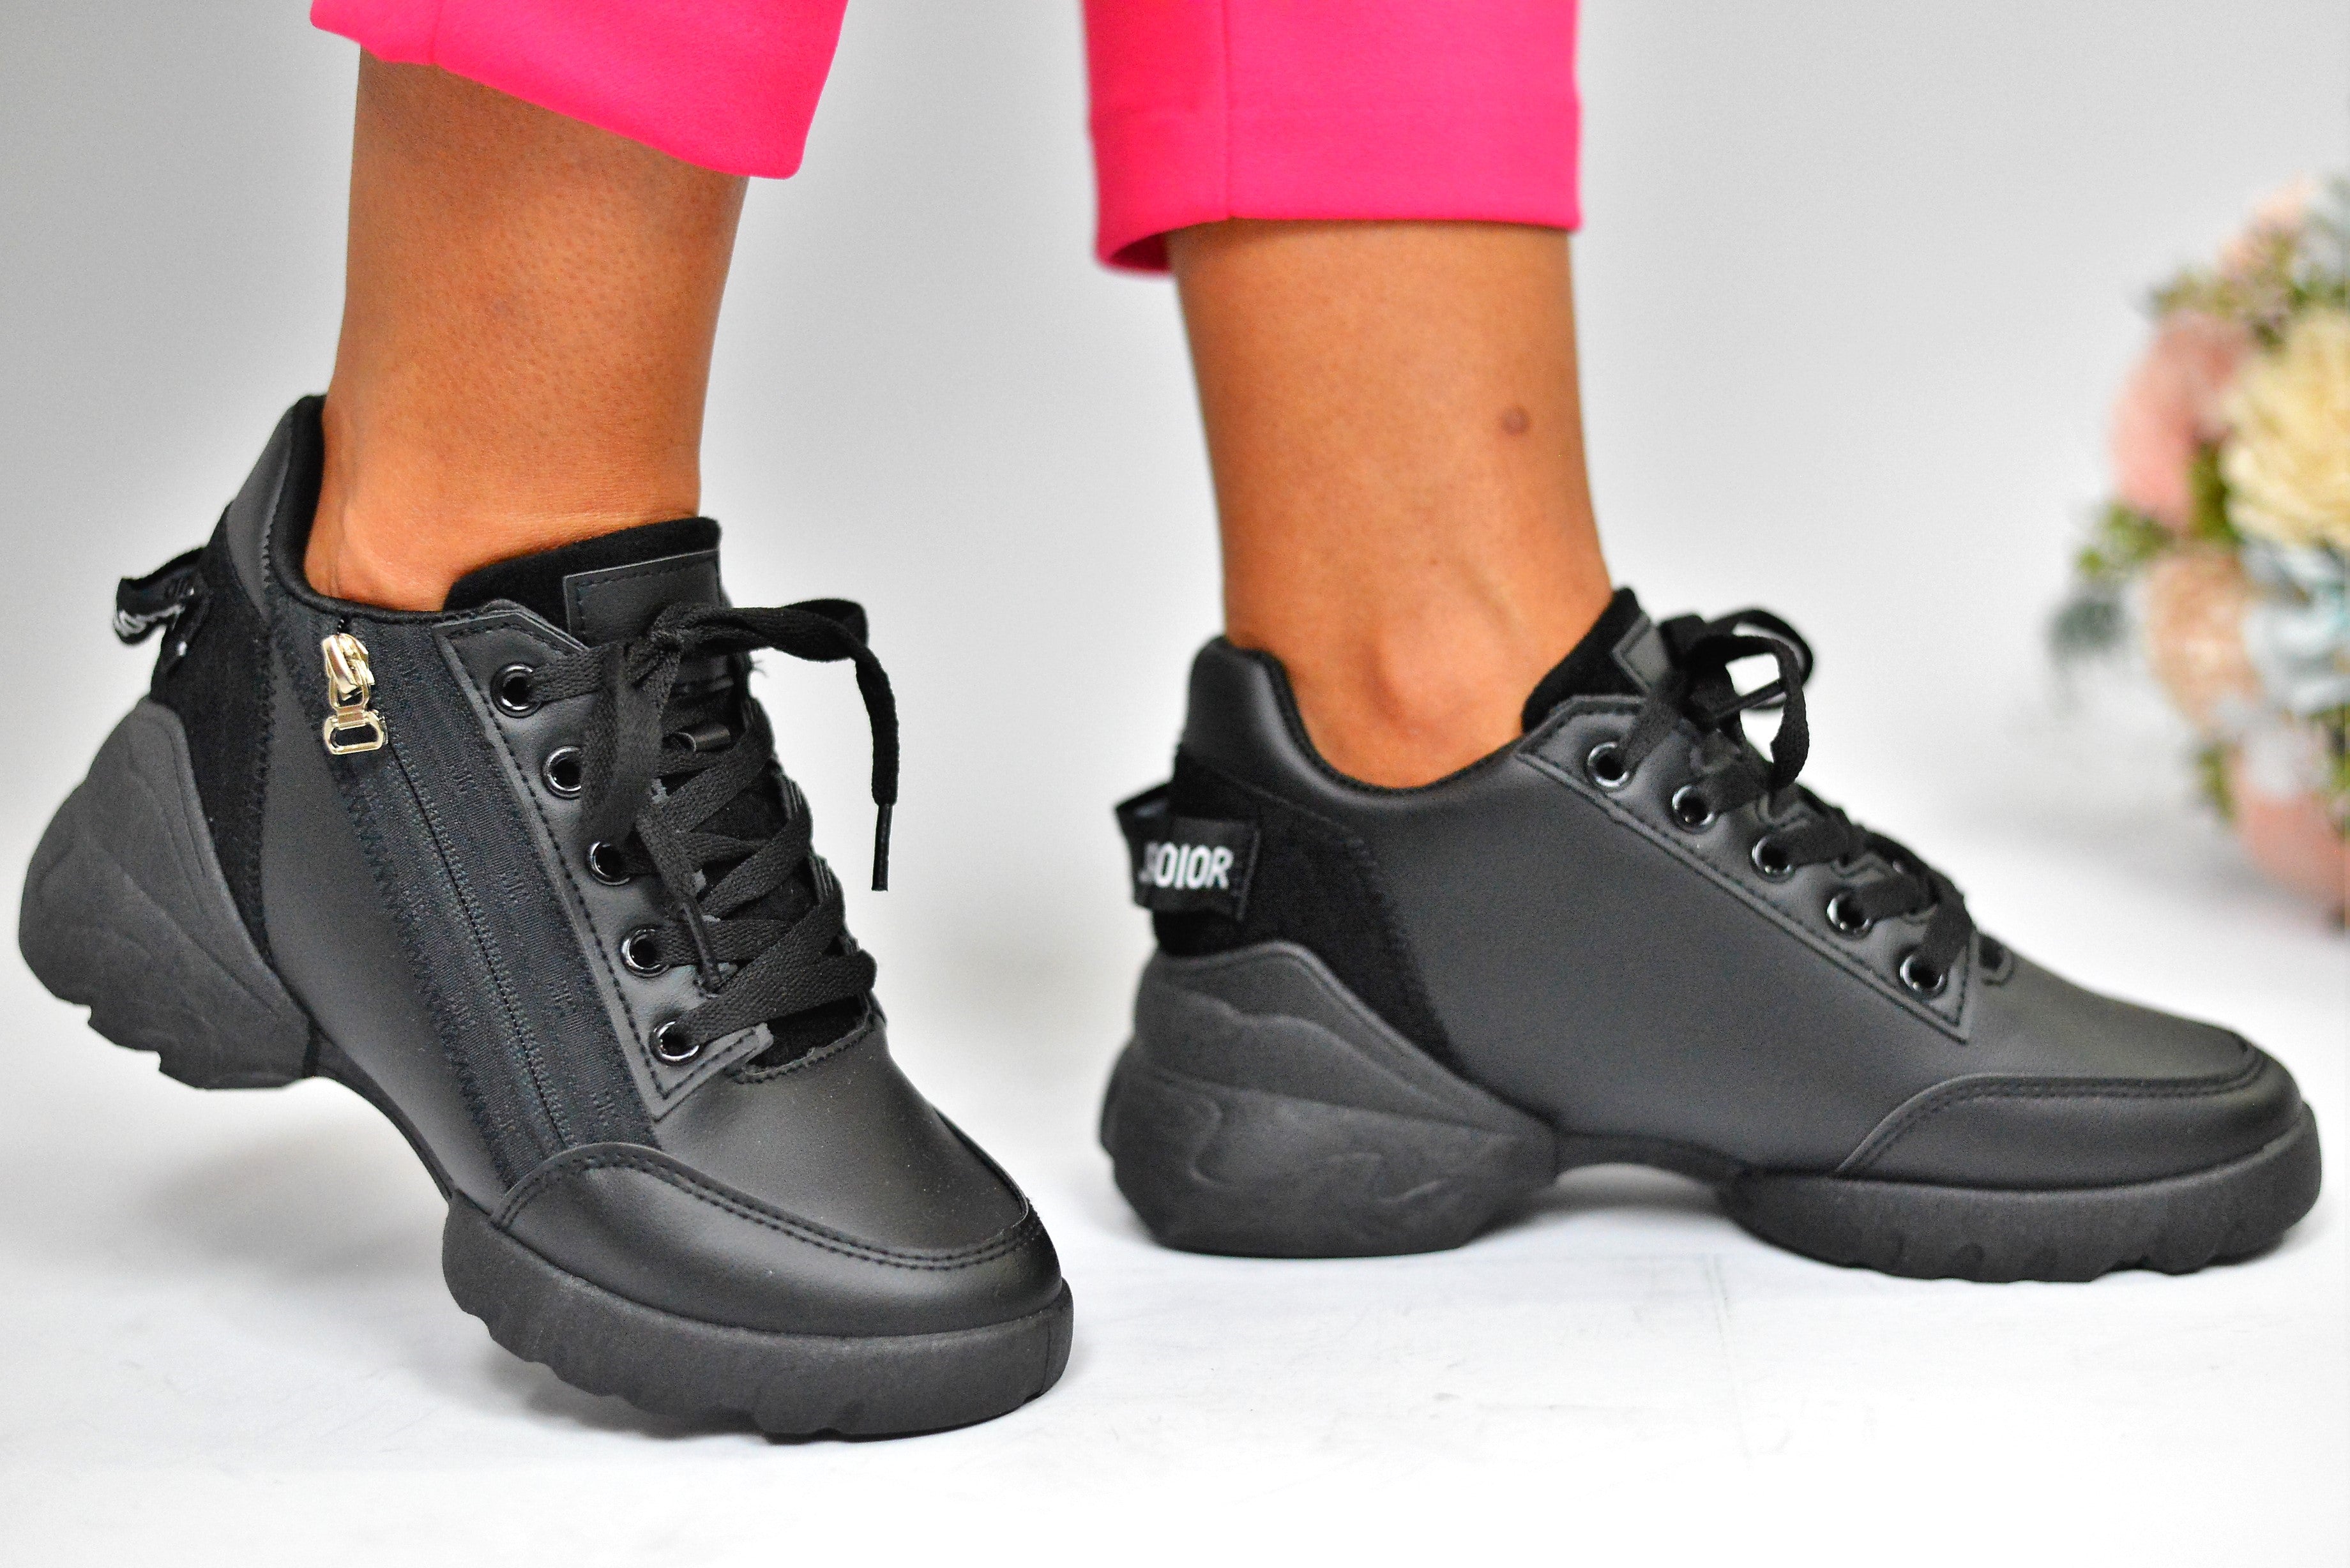 Women's Black Fergie Sneakers Made of Ecological Leather